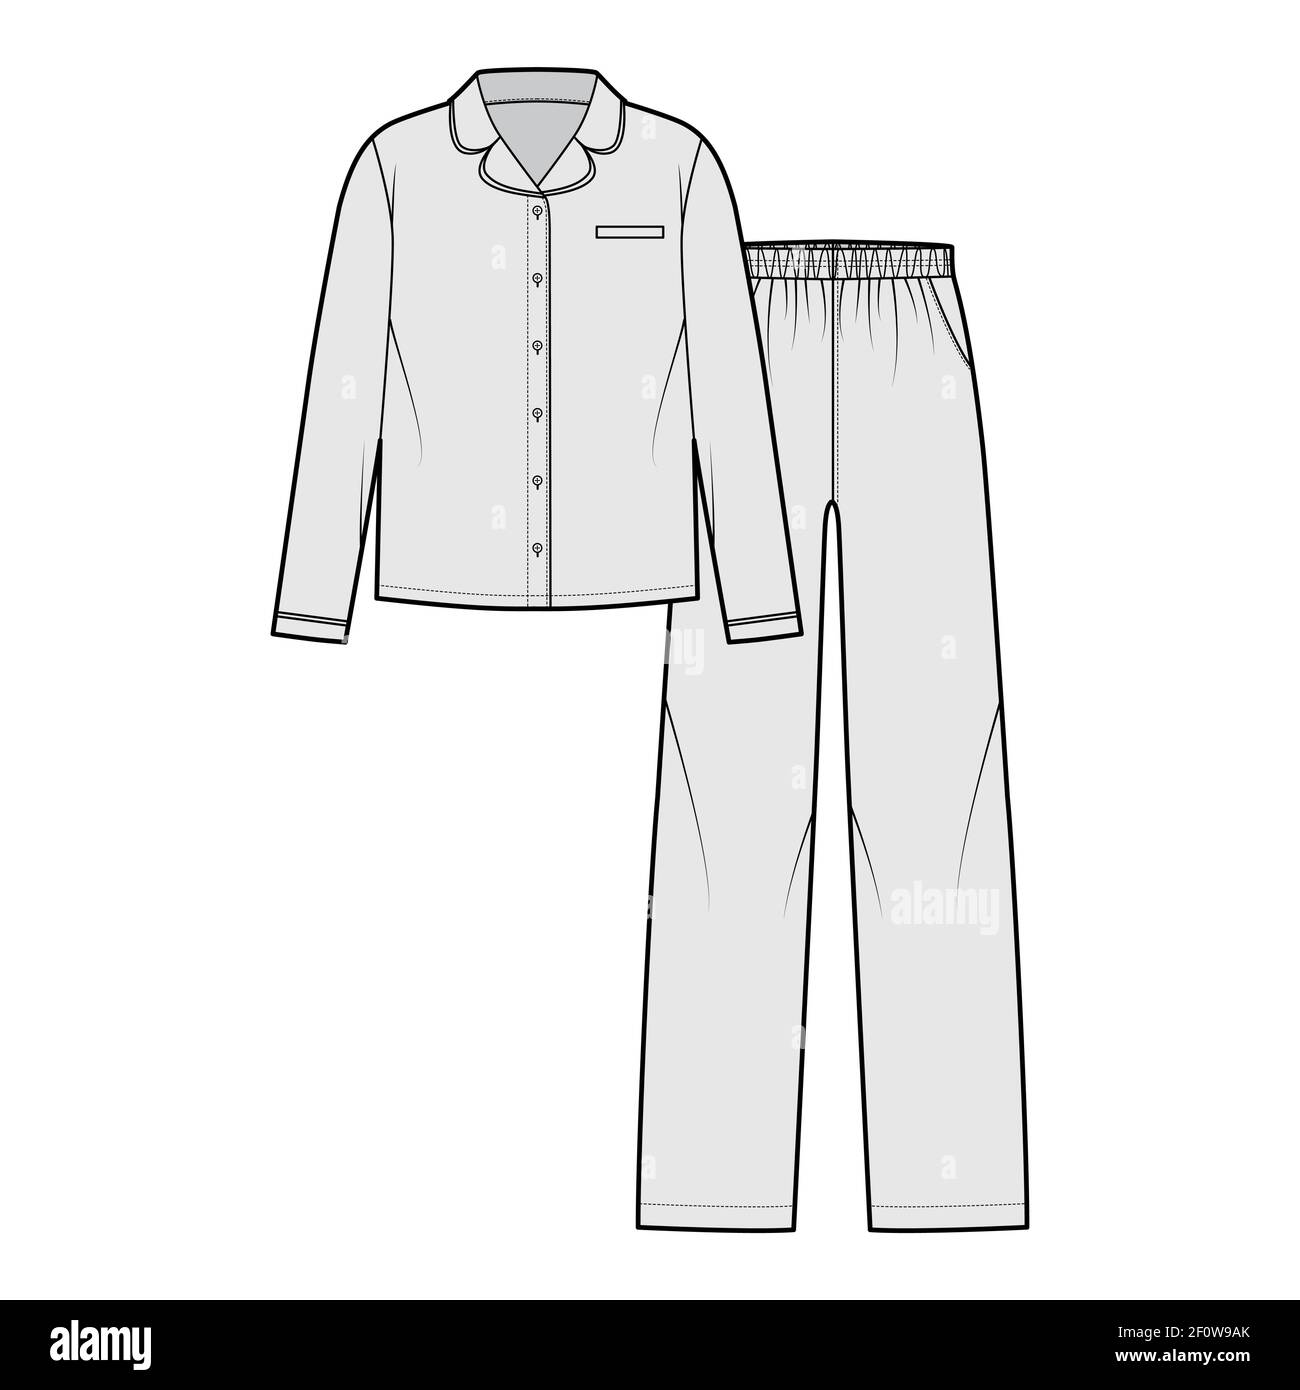 Set of Sleepwear Pajamas shirt, pants technical fashion illustration with  full length, low waist, pockets, button closure, long sleeves. Flat front,  grey color style. Women, men unisex CAD mockup Stock Vector Image